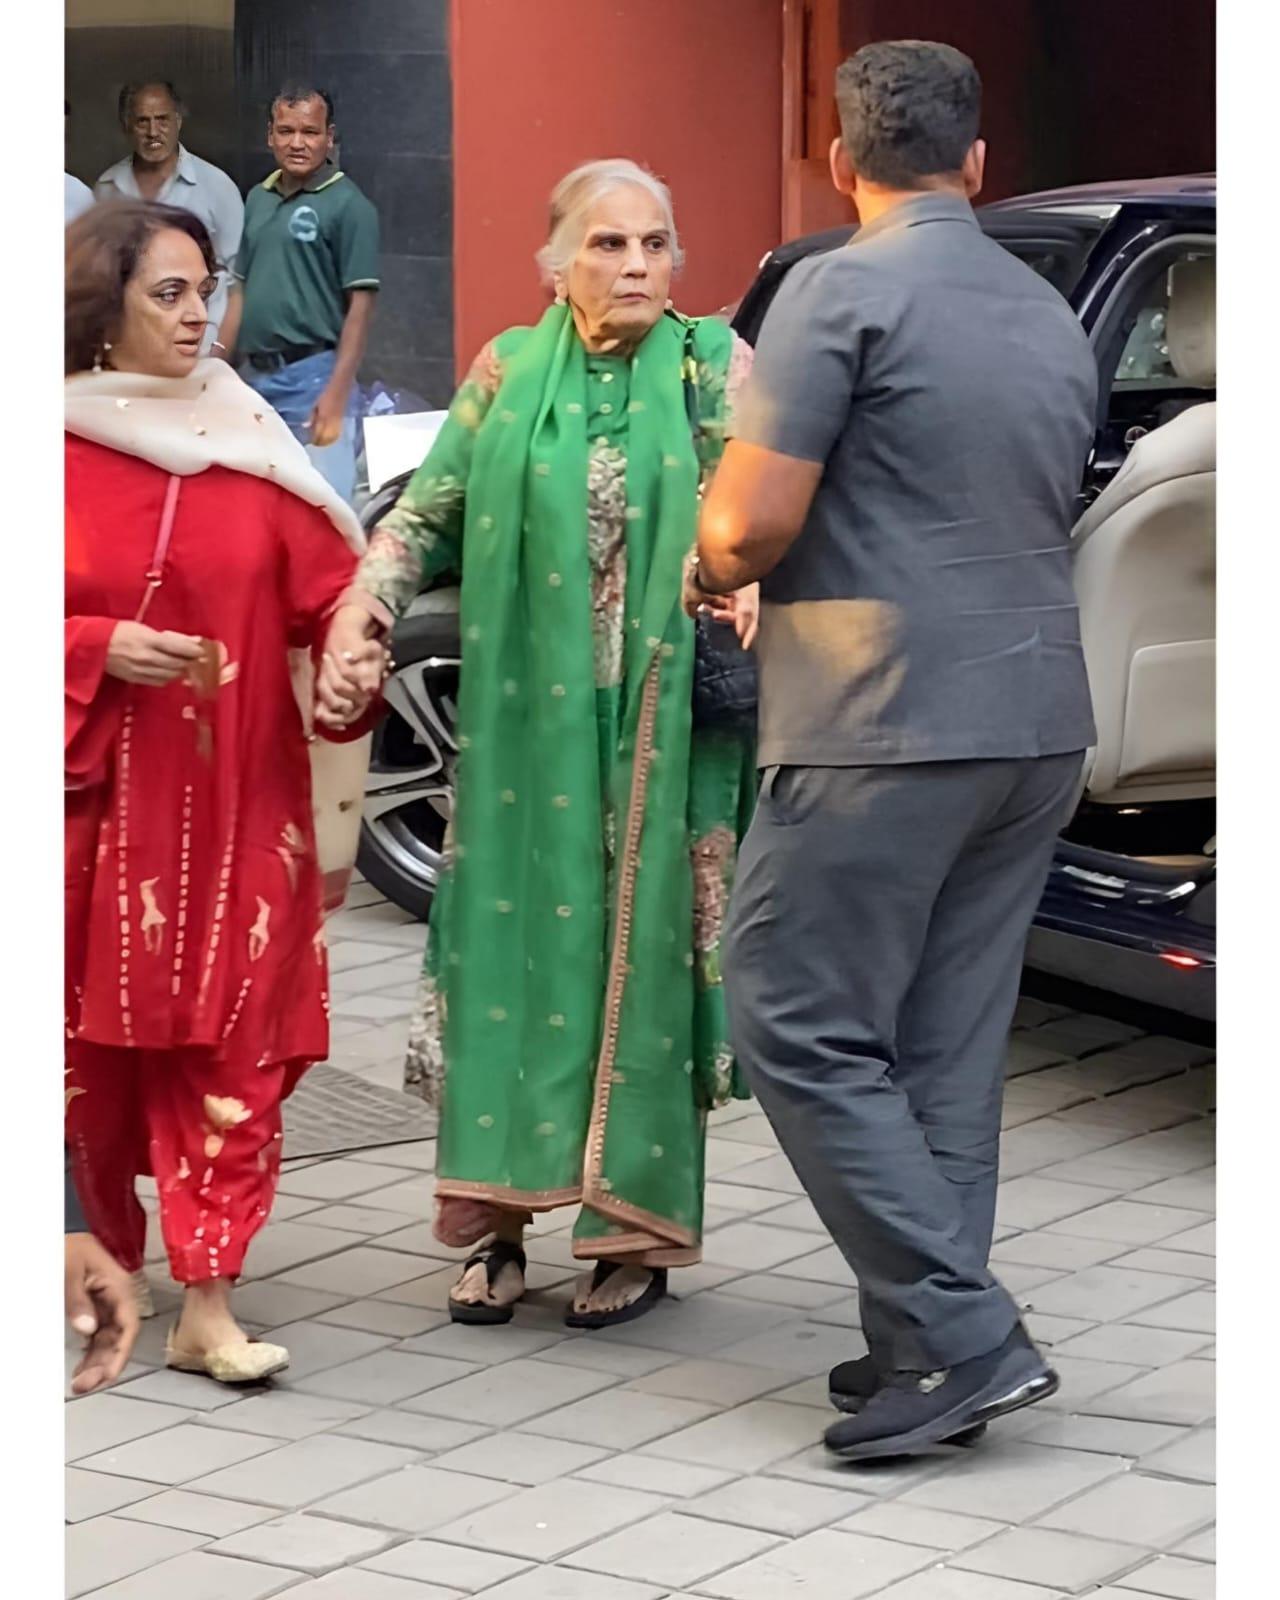 Ammi Jaan Salma Khan was captured by the paparazzi as she came to be a part of Arbaaz's big day. She was looking beautiful in a embroidered green suit